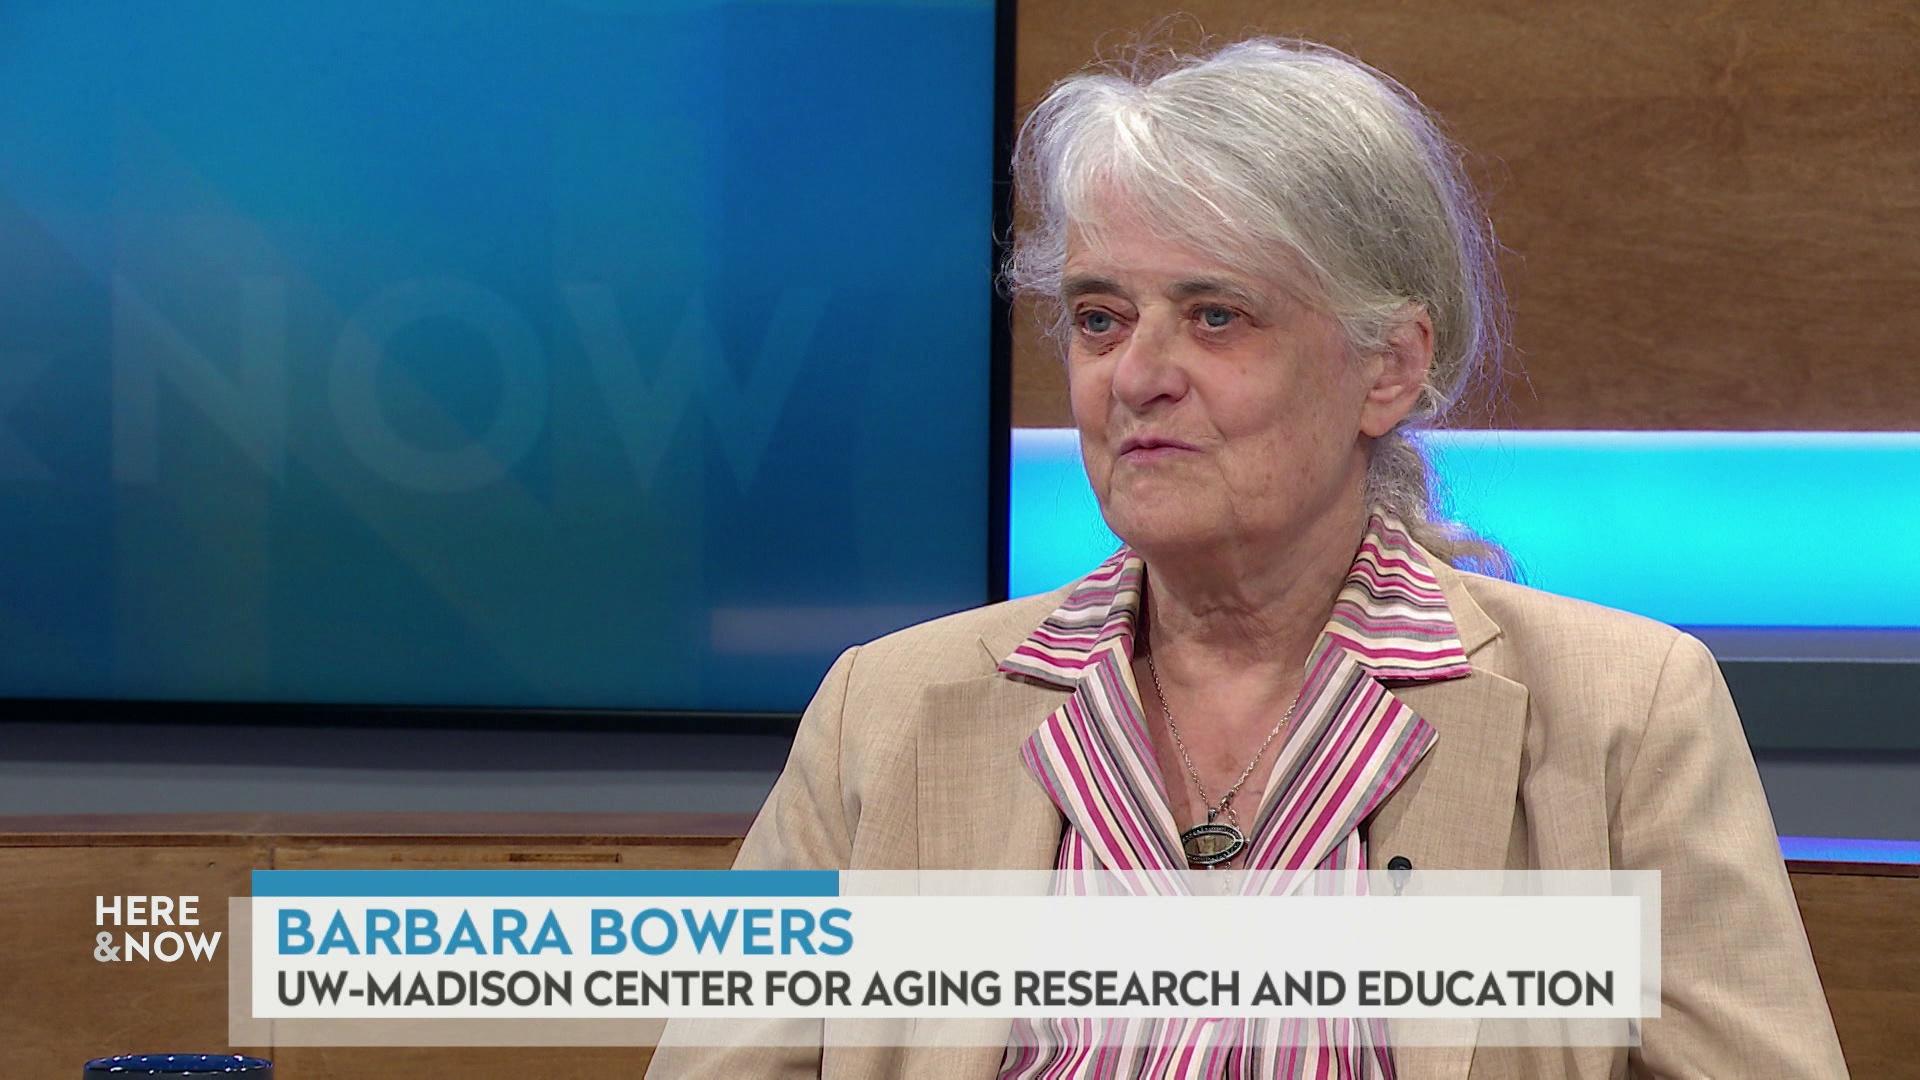 A still image shows Barbara Bowers seated at the 'Here & Now' set featuring wood paneling, with a graphic at bottom reading 'Barbara Bowers' and 'UW-Madison Center for Aging Research and Education.'